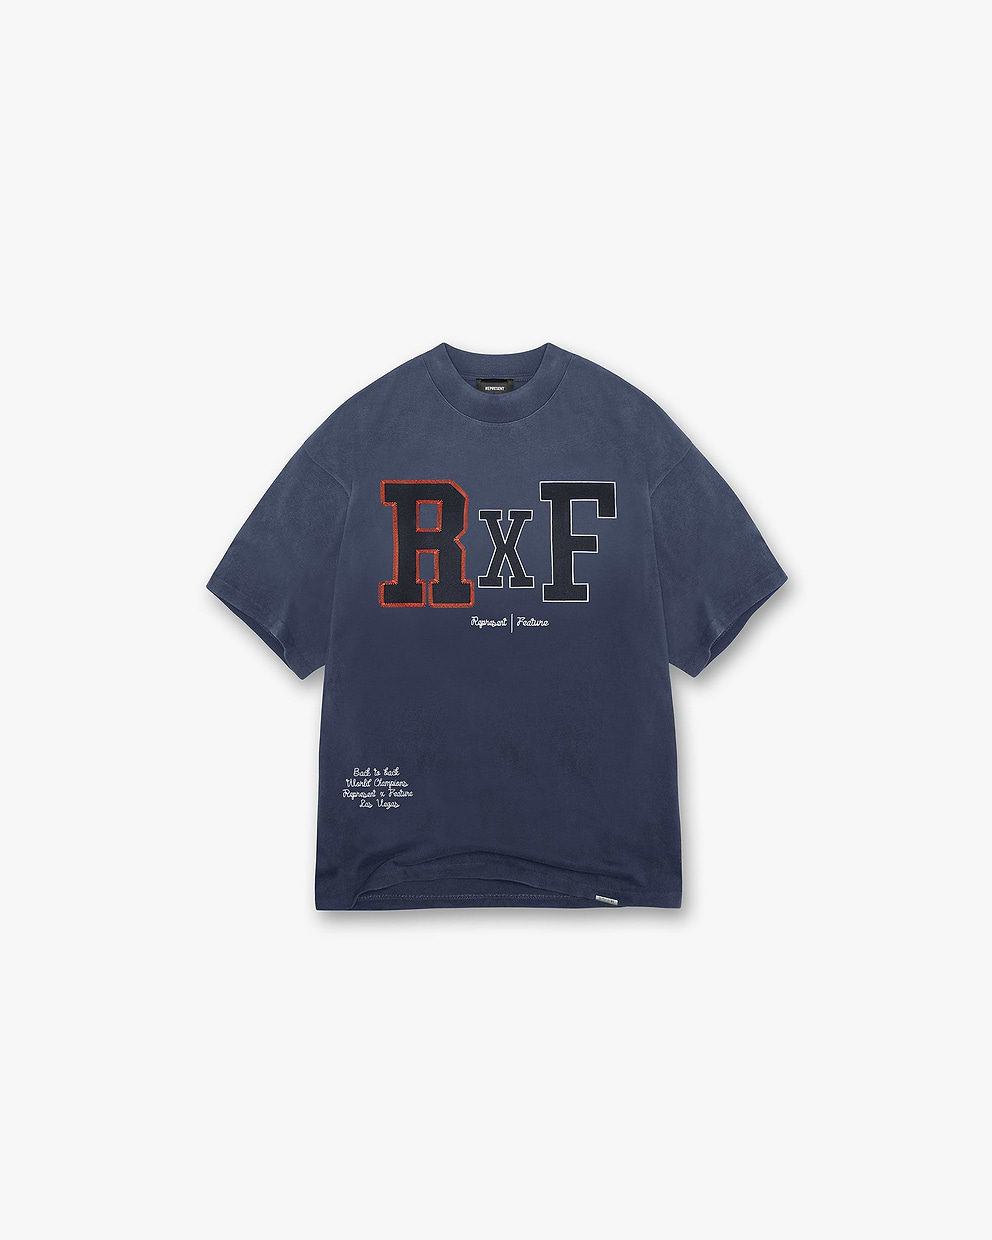 Represent X Feature Champions T-Shirt - Midnight Navy